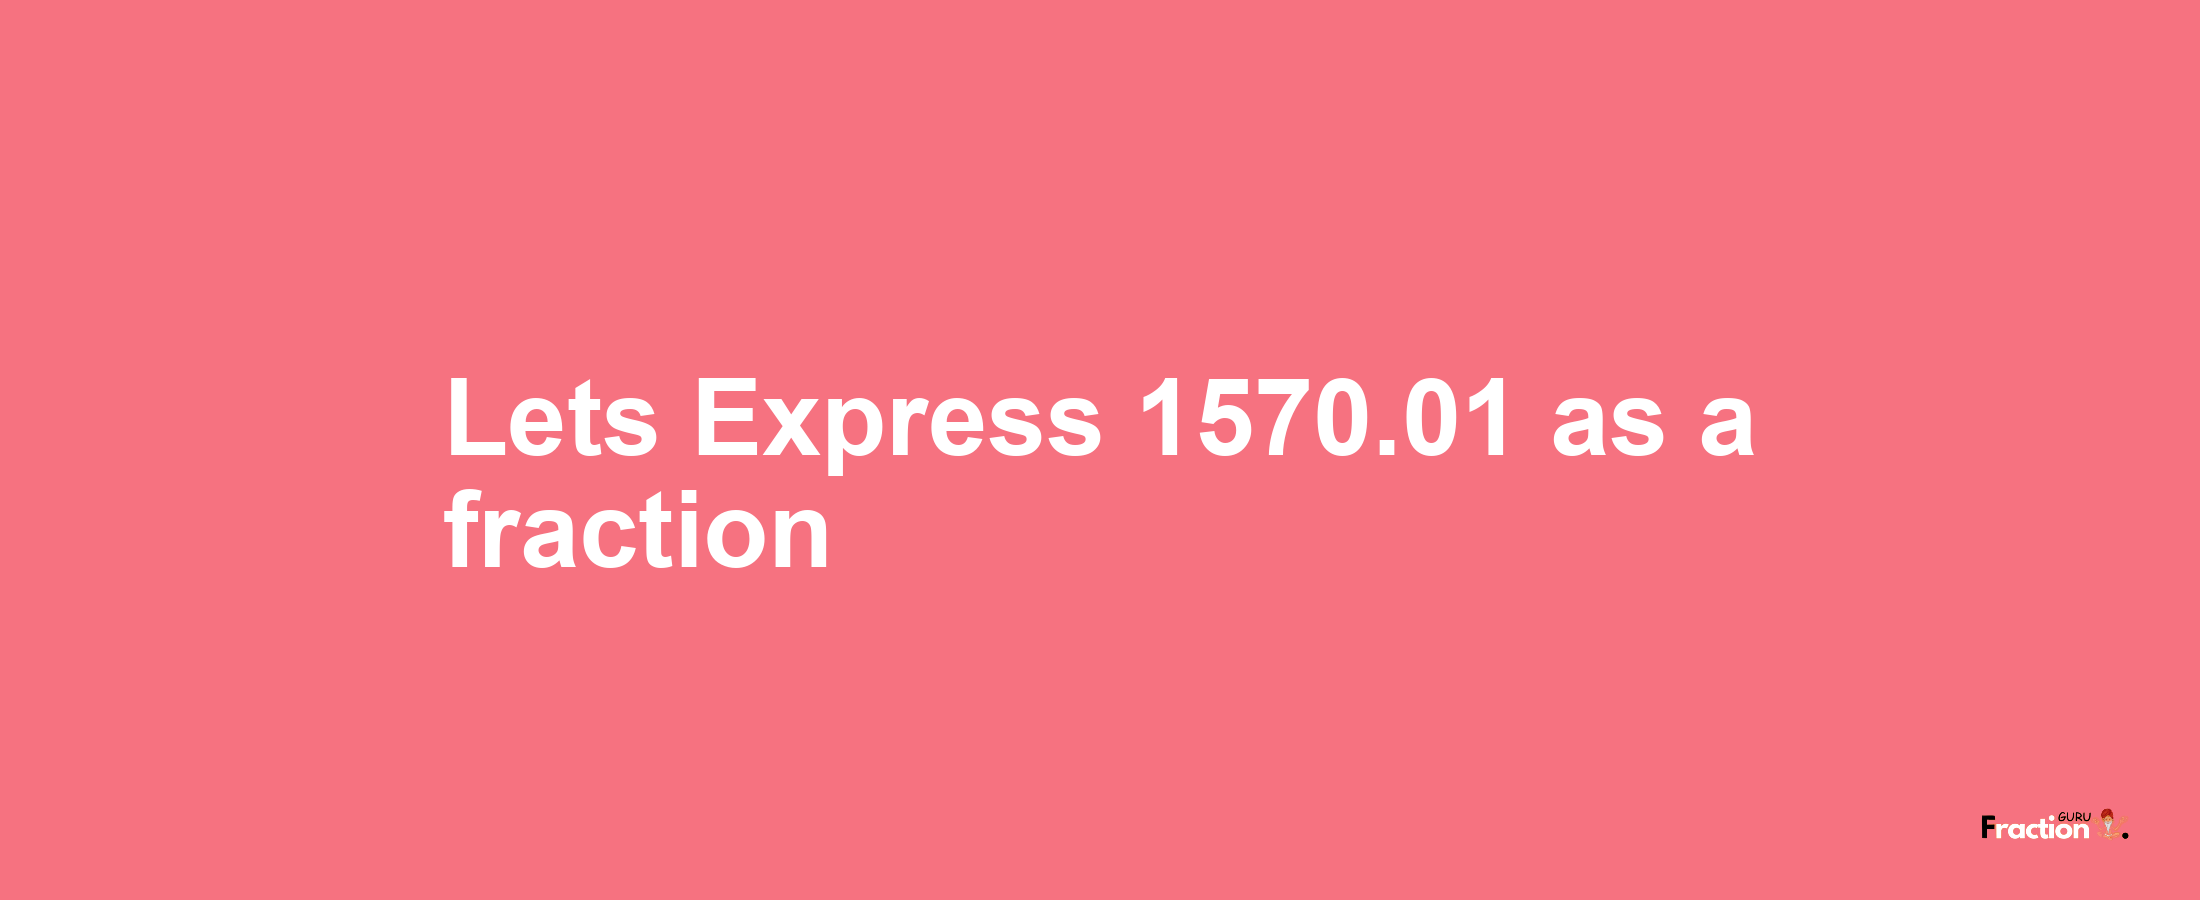 Lets Express 1570.01 as afraction